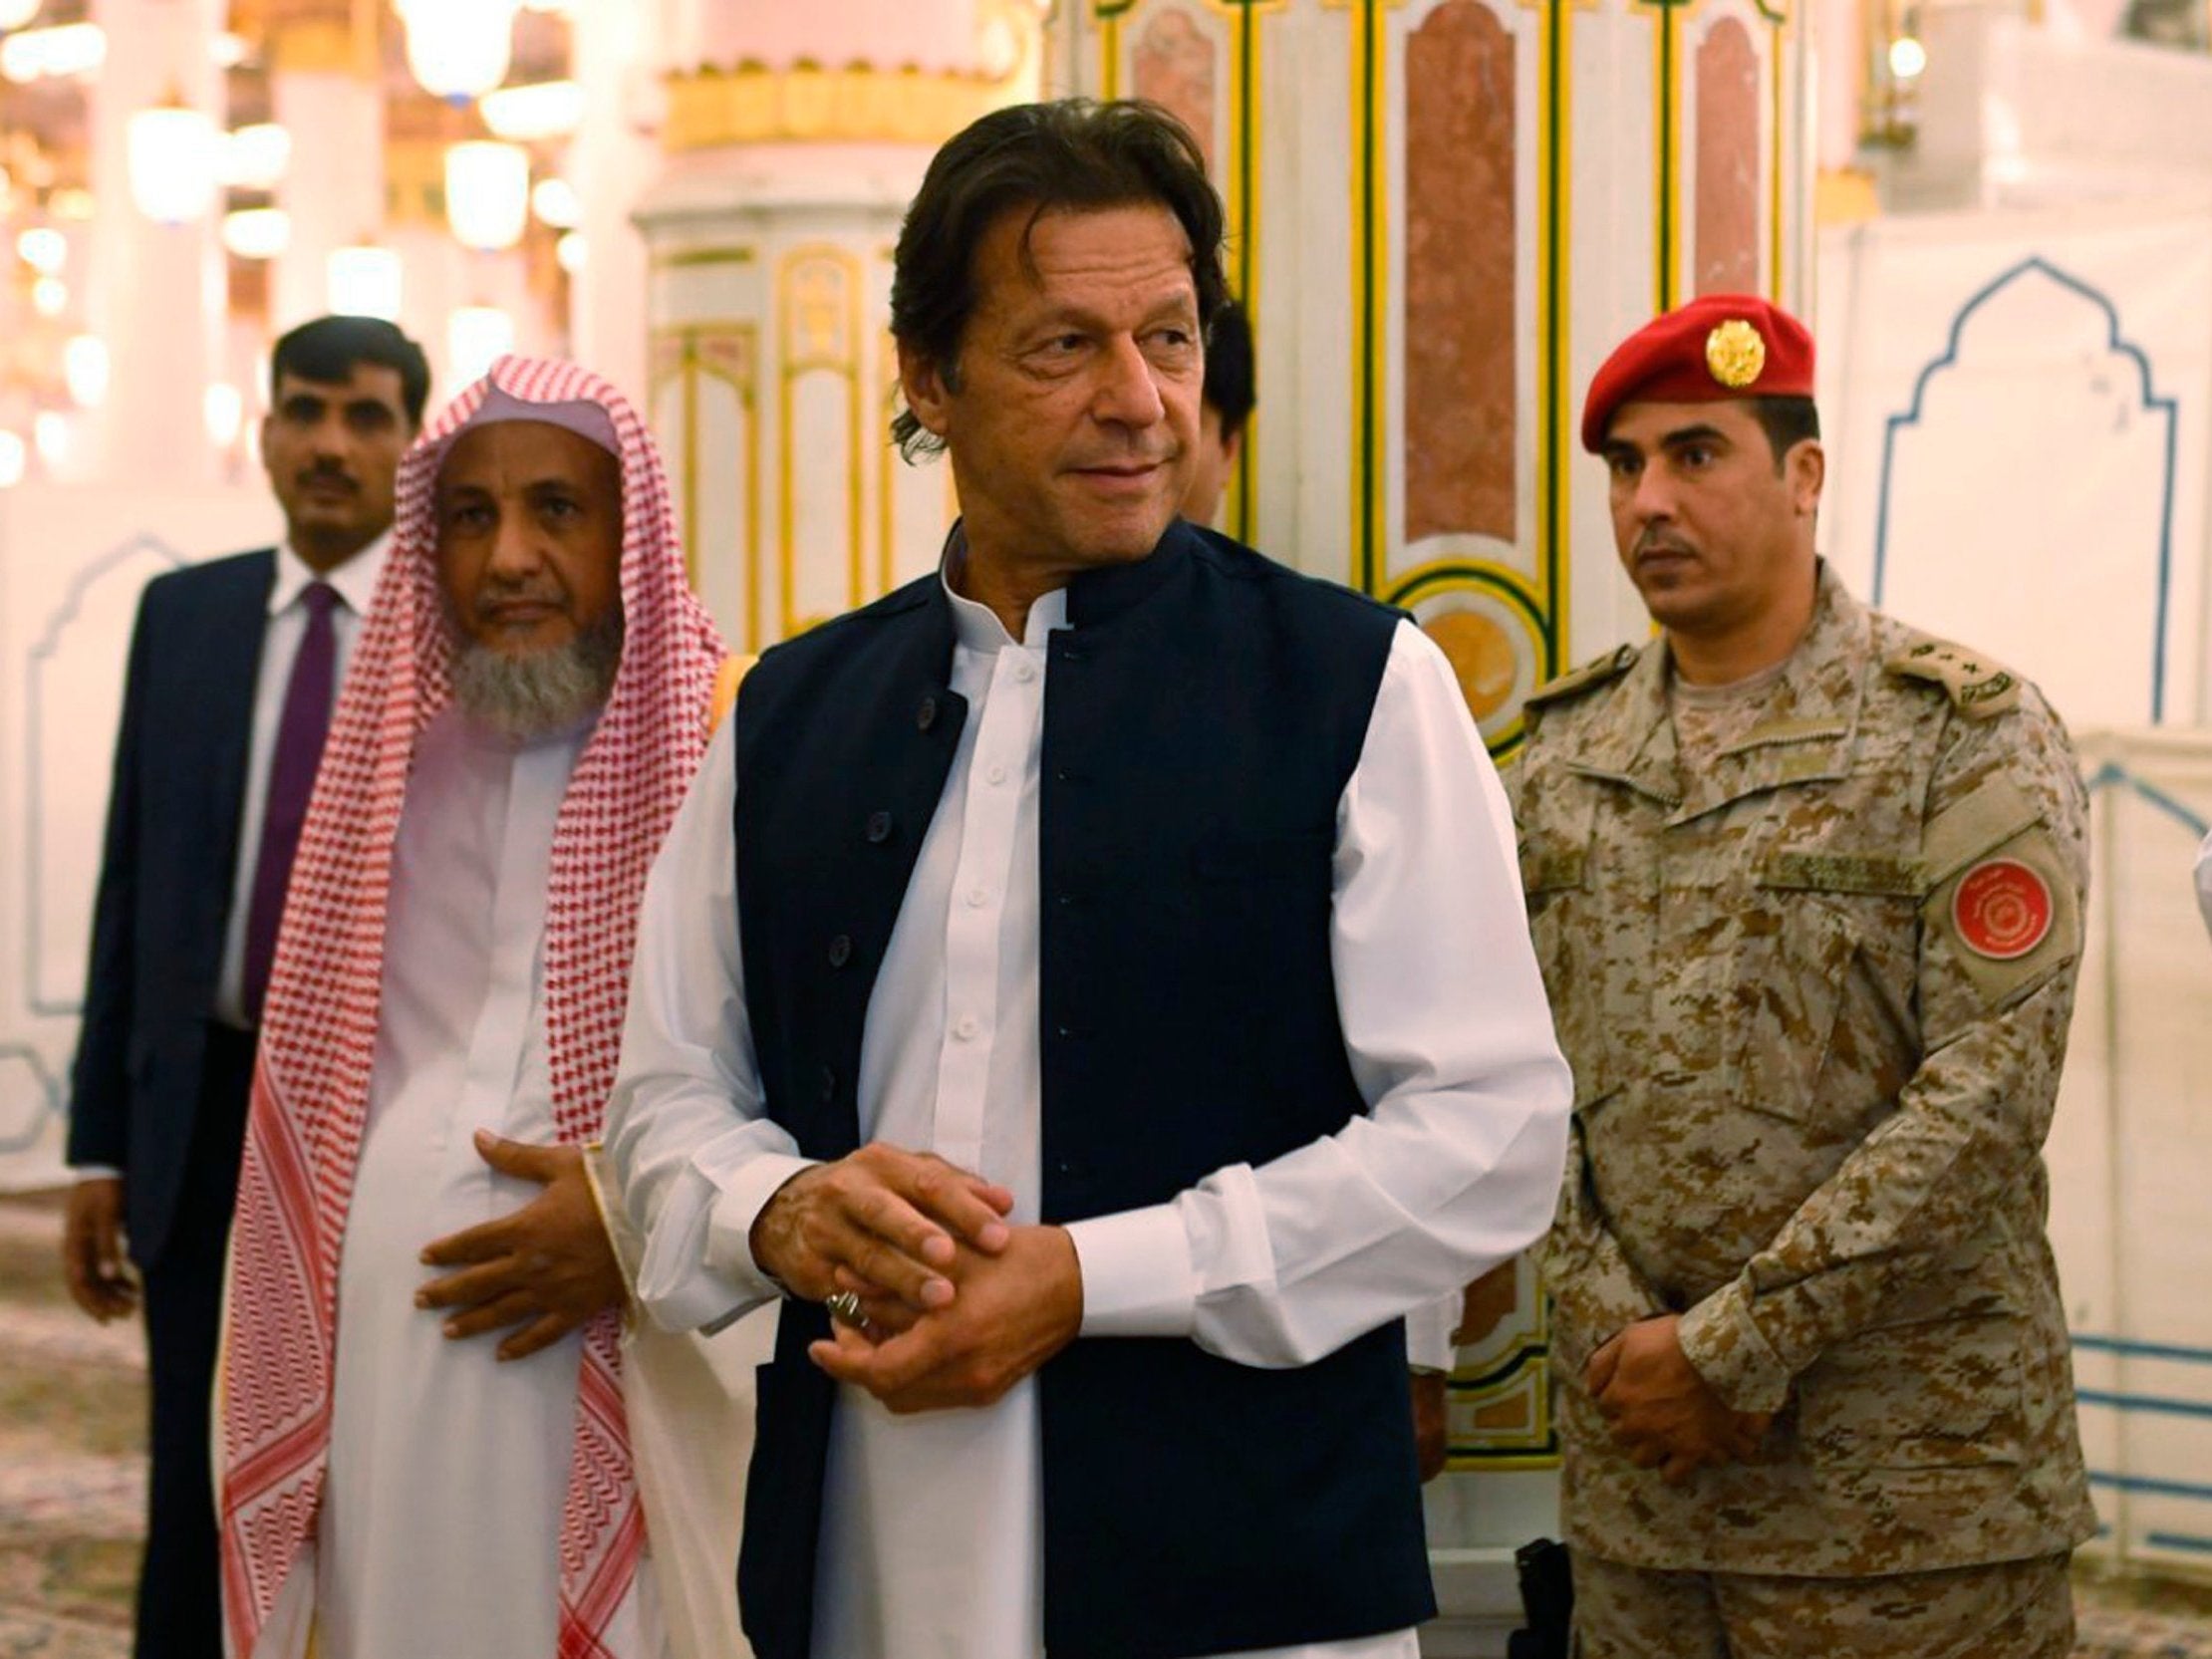 Imran Khan visits the Prophet's Mosque in Medina, Saudi Arabia, during his first overseas trip since taking office